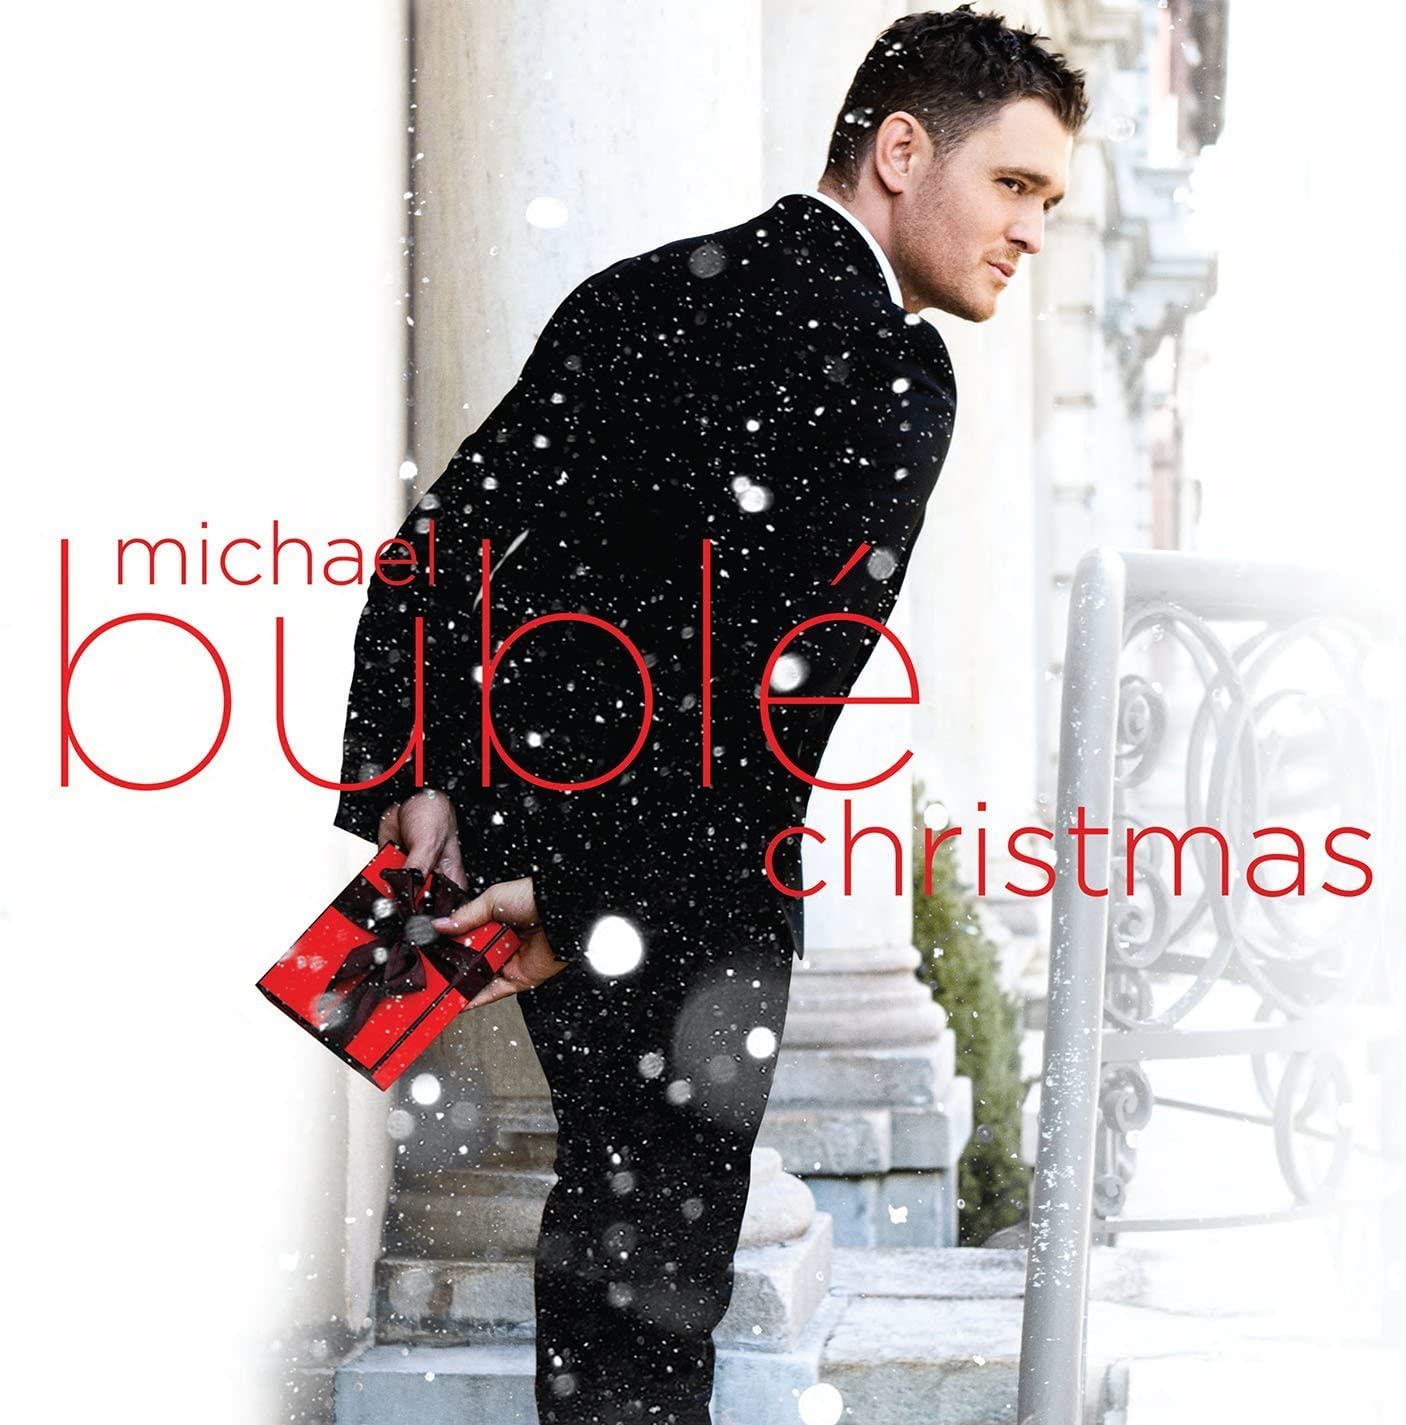 Christmas by Michael Bublé